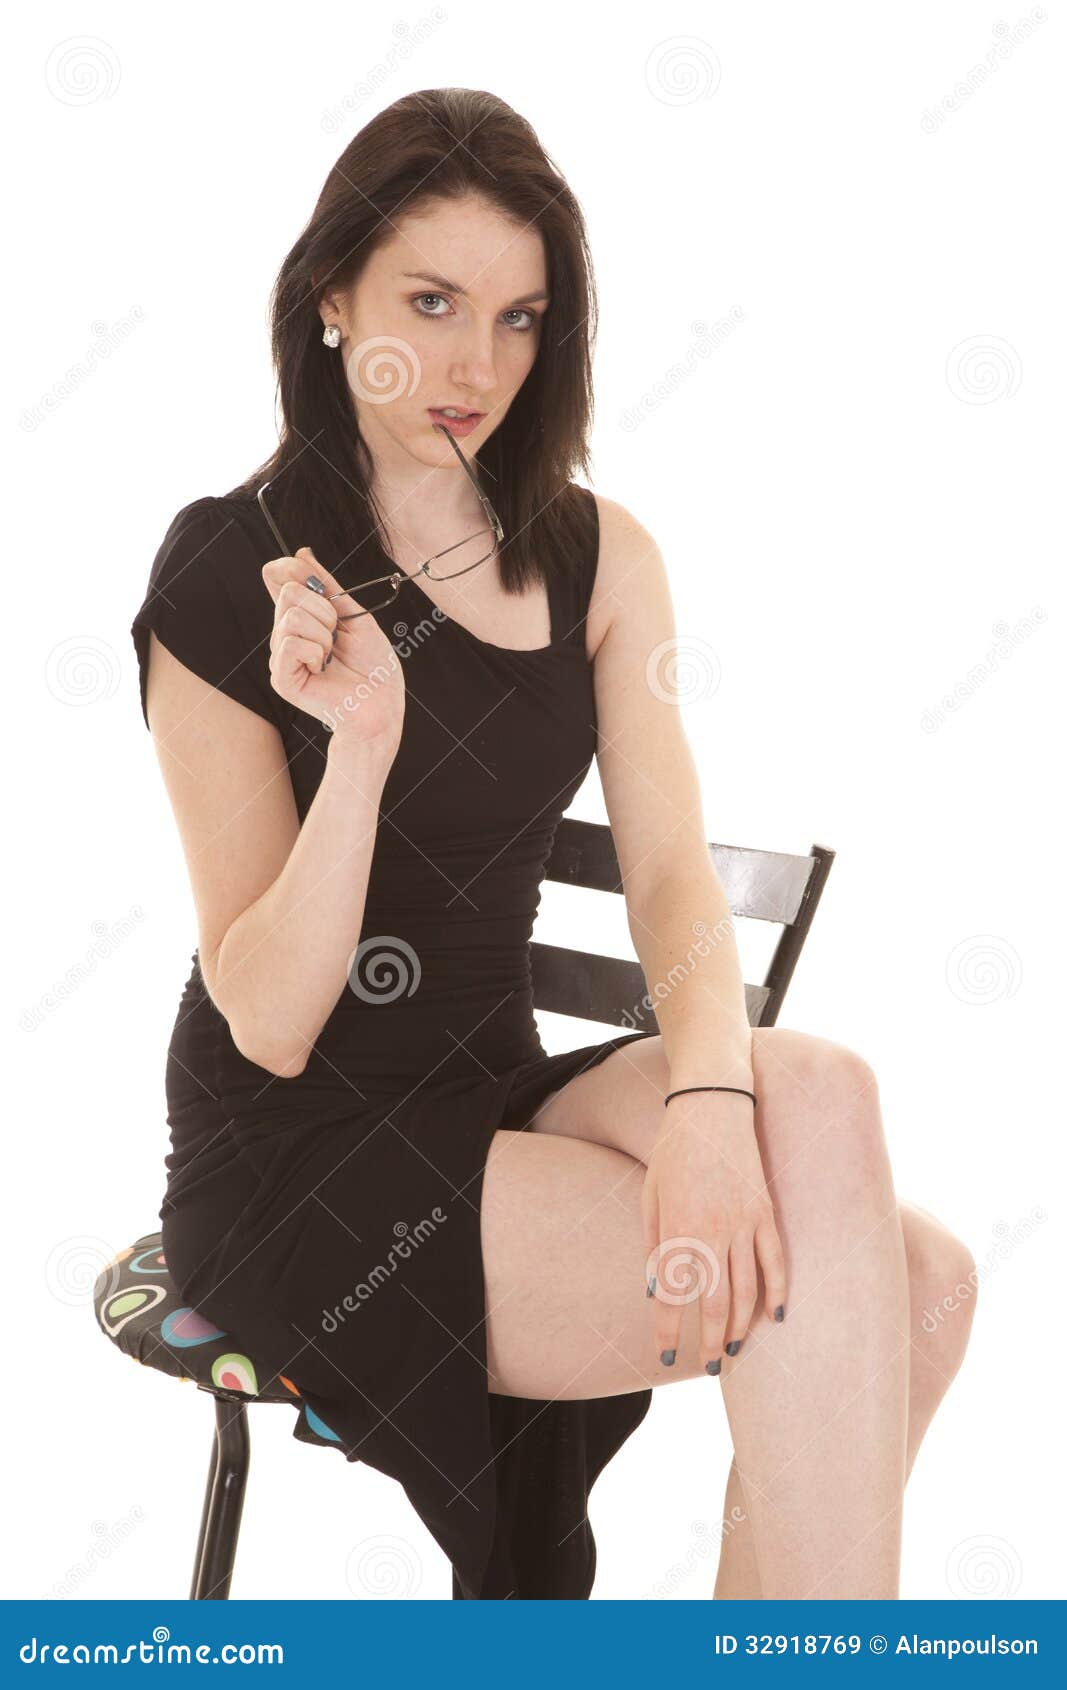 Woman Black Dress Sit Glasses By Mouth Stock Image - Image ...